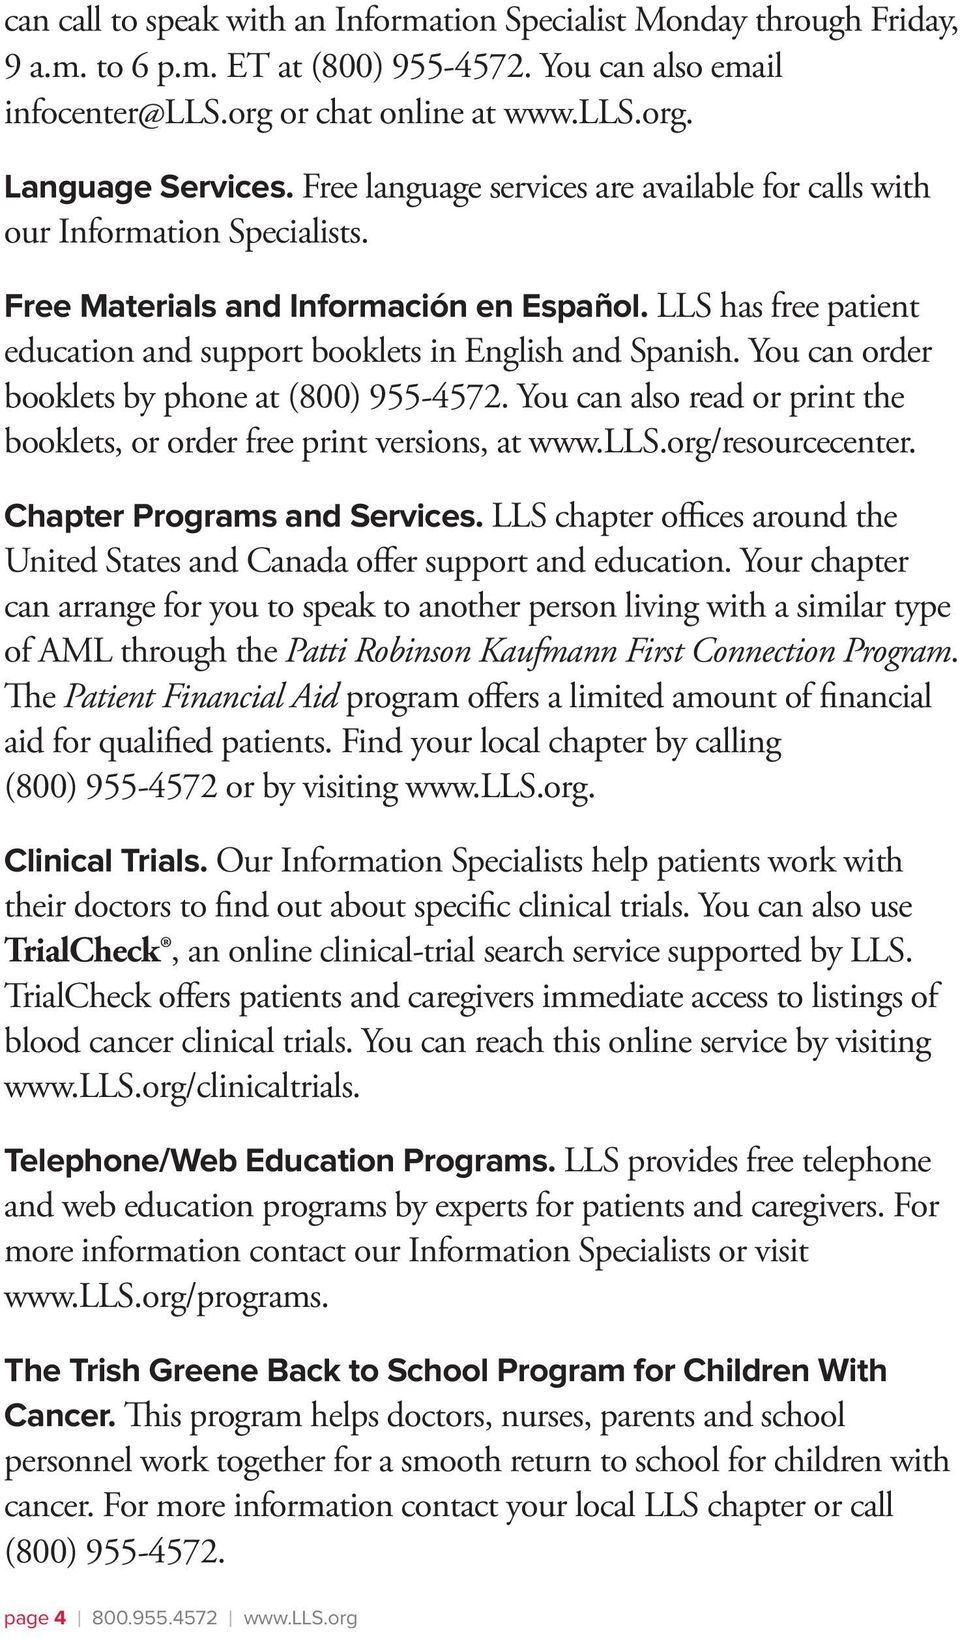 You can order booklets by phone at (800) 955-4572. You can also read or print the booklets, or order free print versions, at www.lls.org/resourcecenter. Chapter Programs and Services.